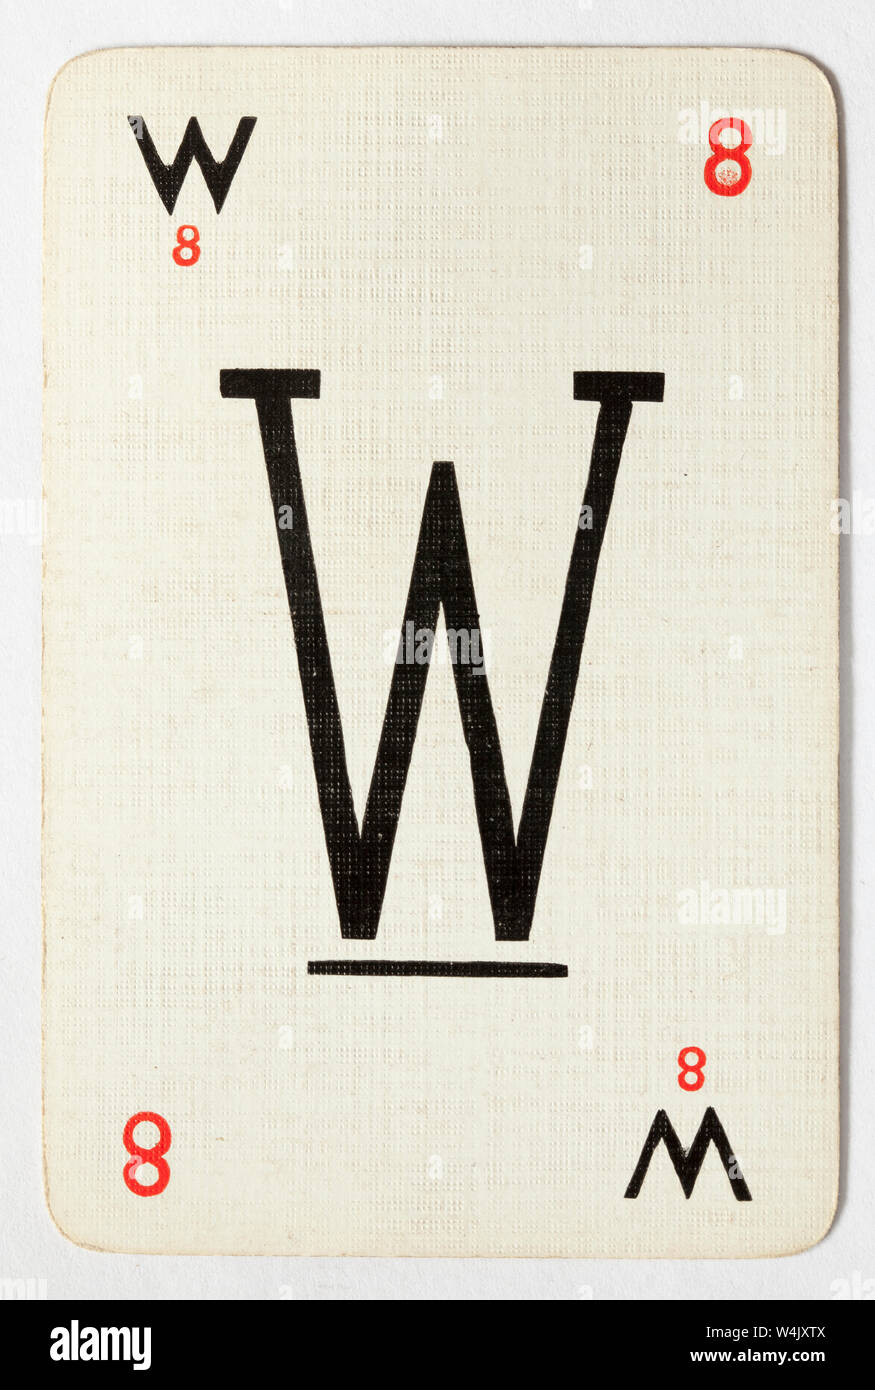 Vintage Playing Card Letter  from Lexicon Card Game Stock Photo